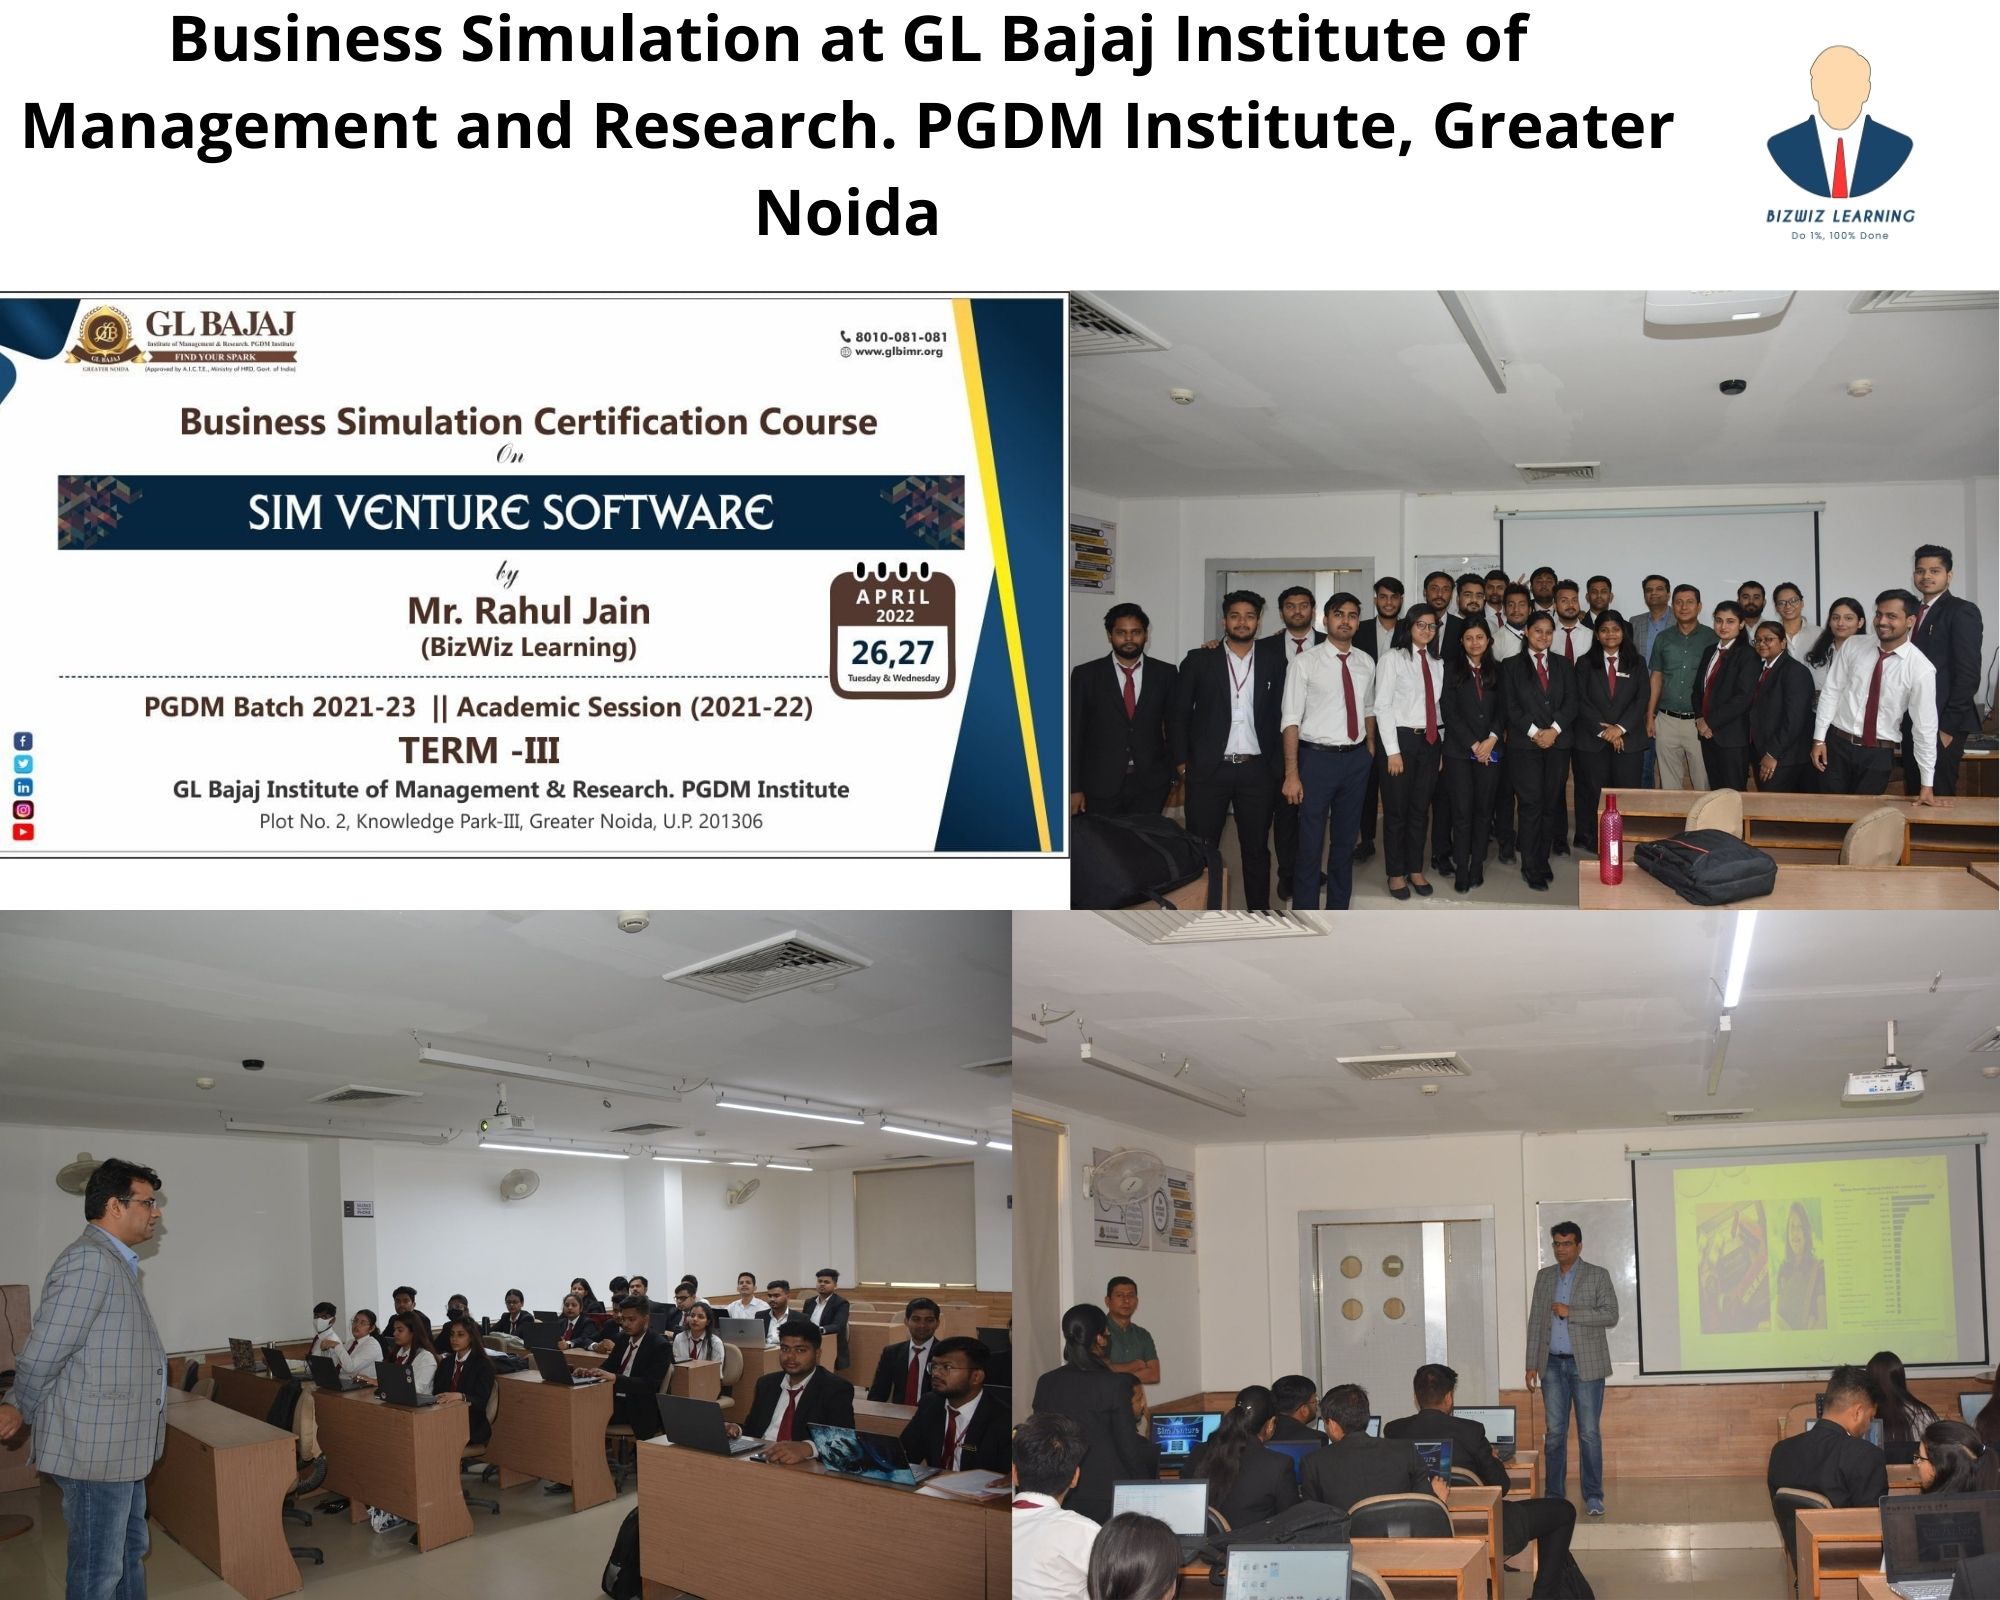 Business Simulation at GL Bajaj Institute of Management and Research. PGDM Institute, Greater Noida